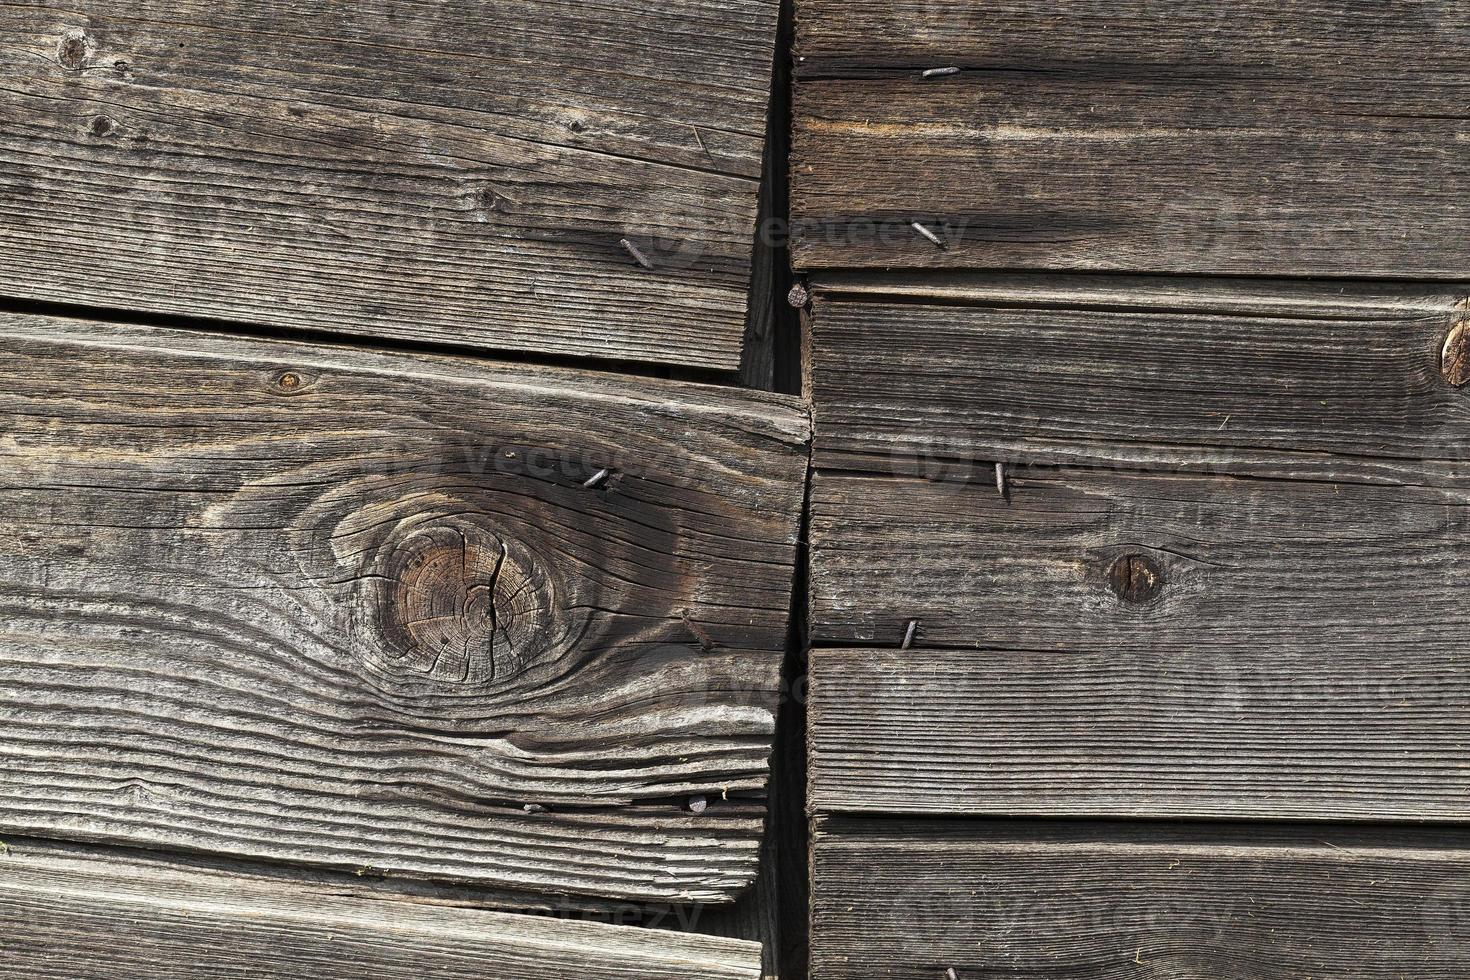 old wood surface photo